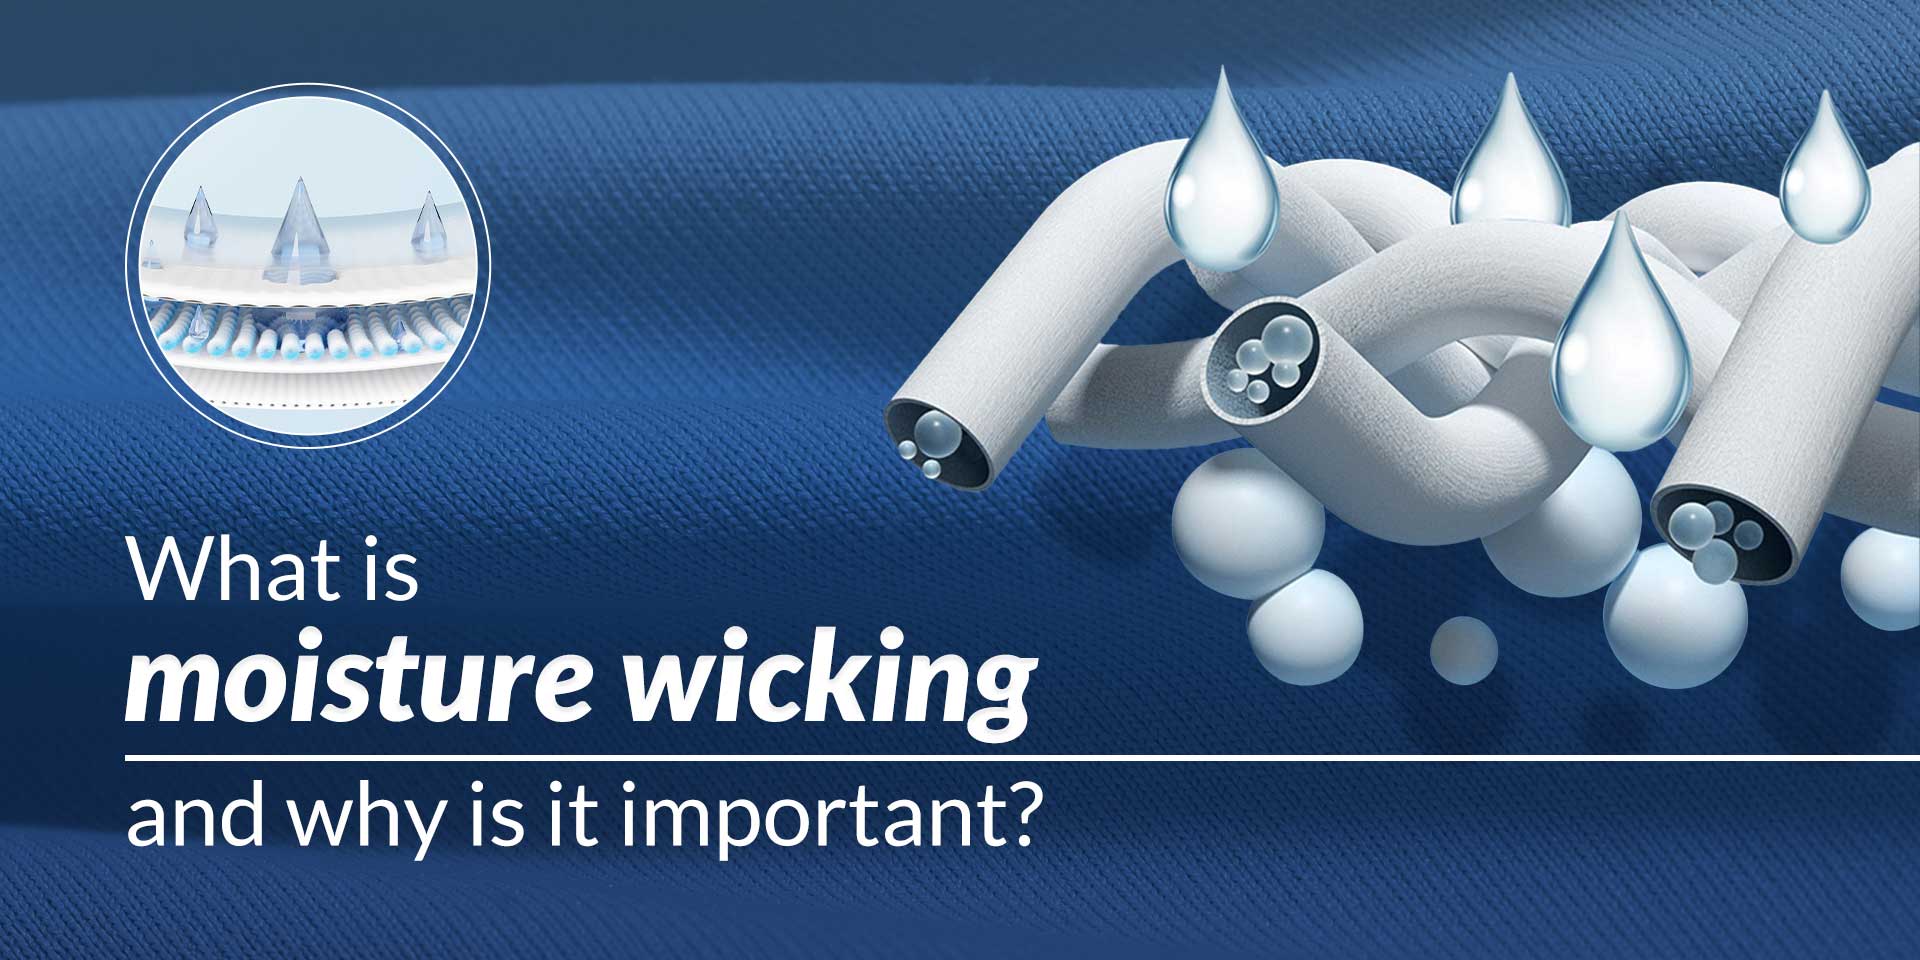 What is moisture wicking and why is it important?